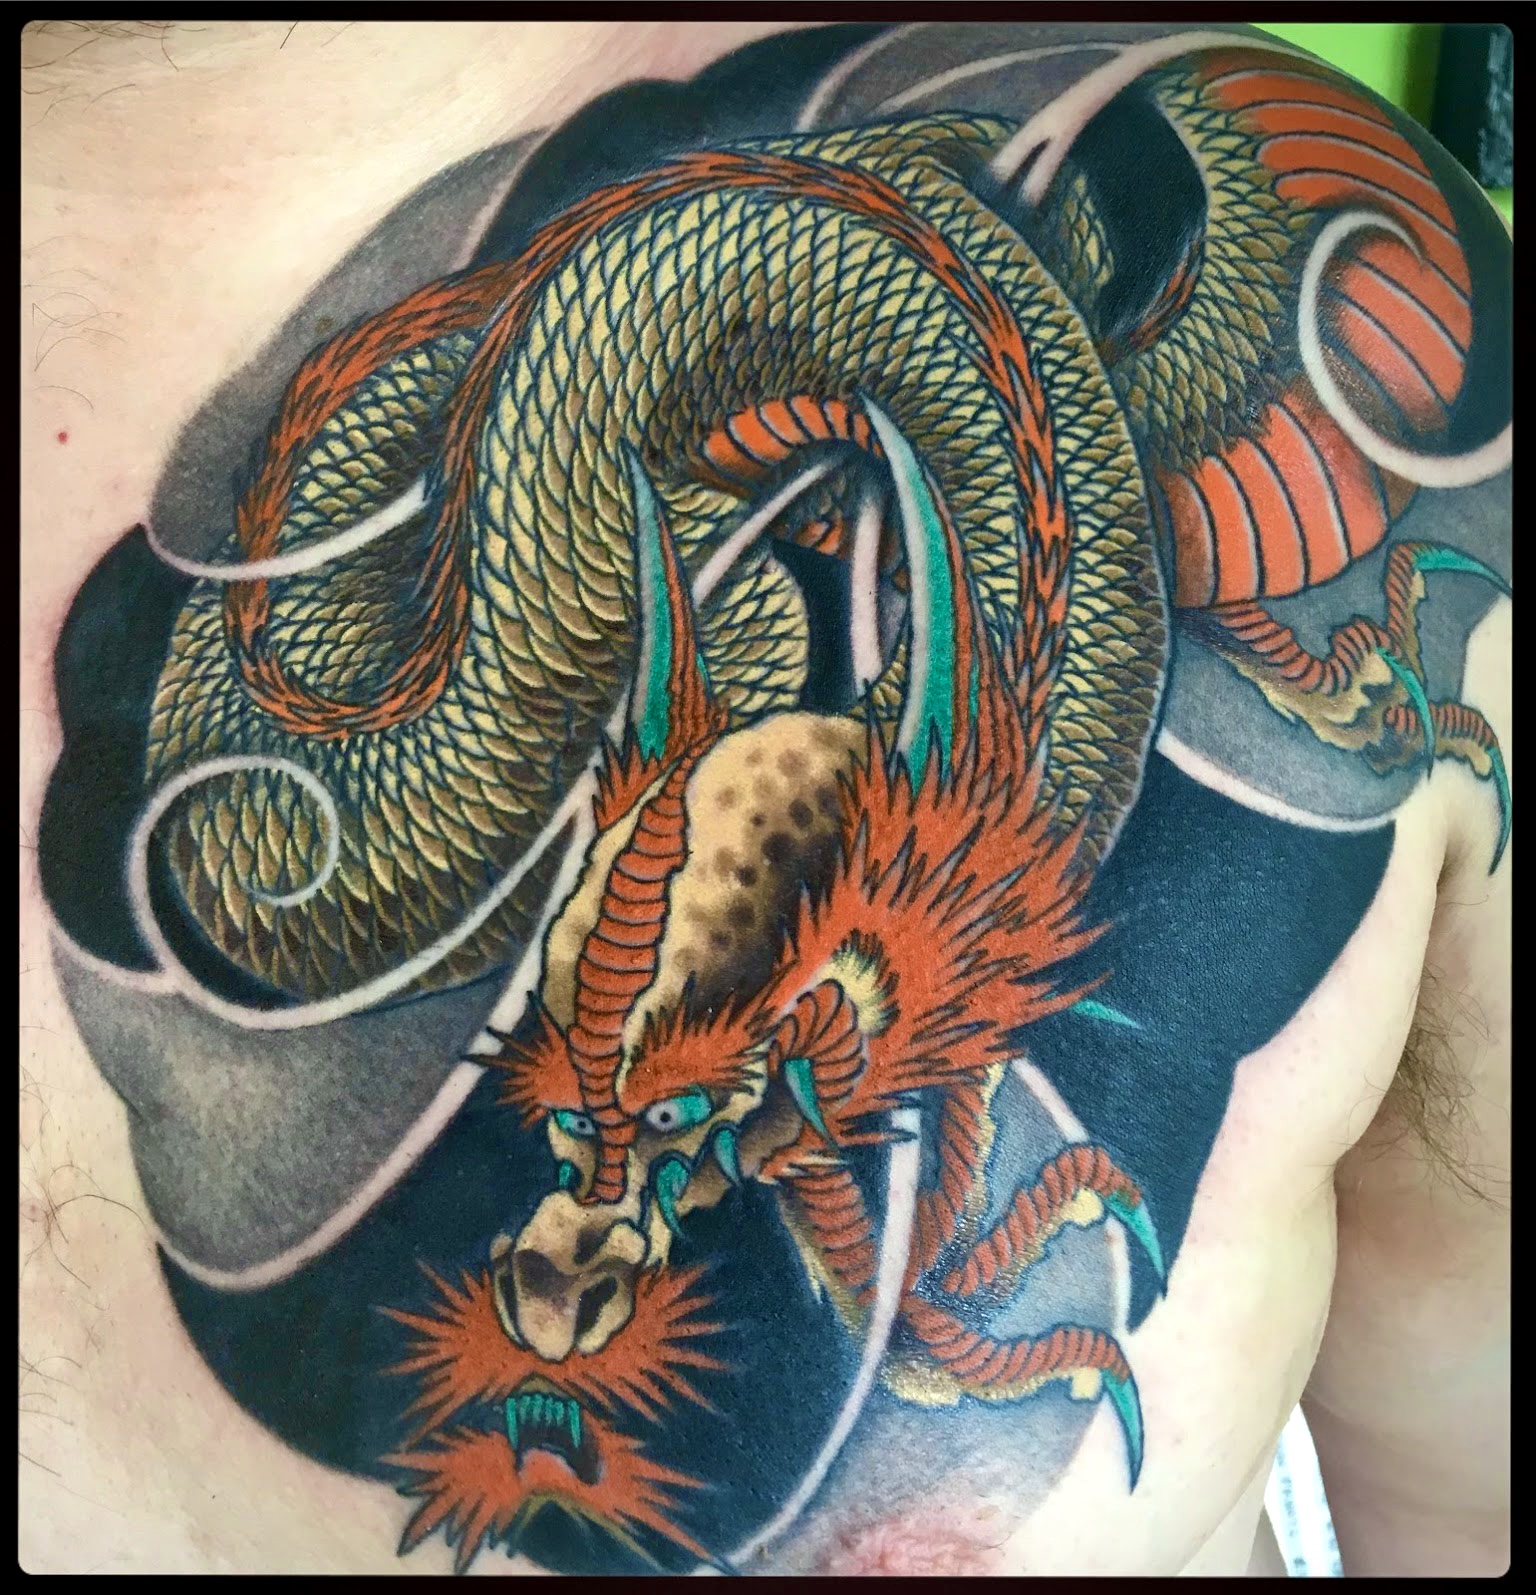 Irezumi neo traditional Japanese oriental tattoo in colour of a dragon ryū chest plate by Ricks custom tattooing Ricardo Pedro at Nexus Collective